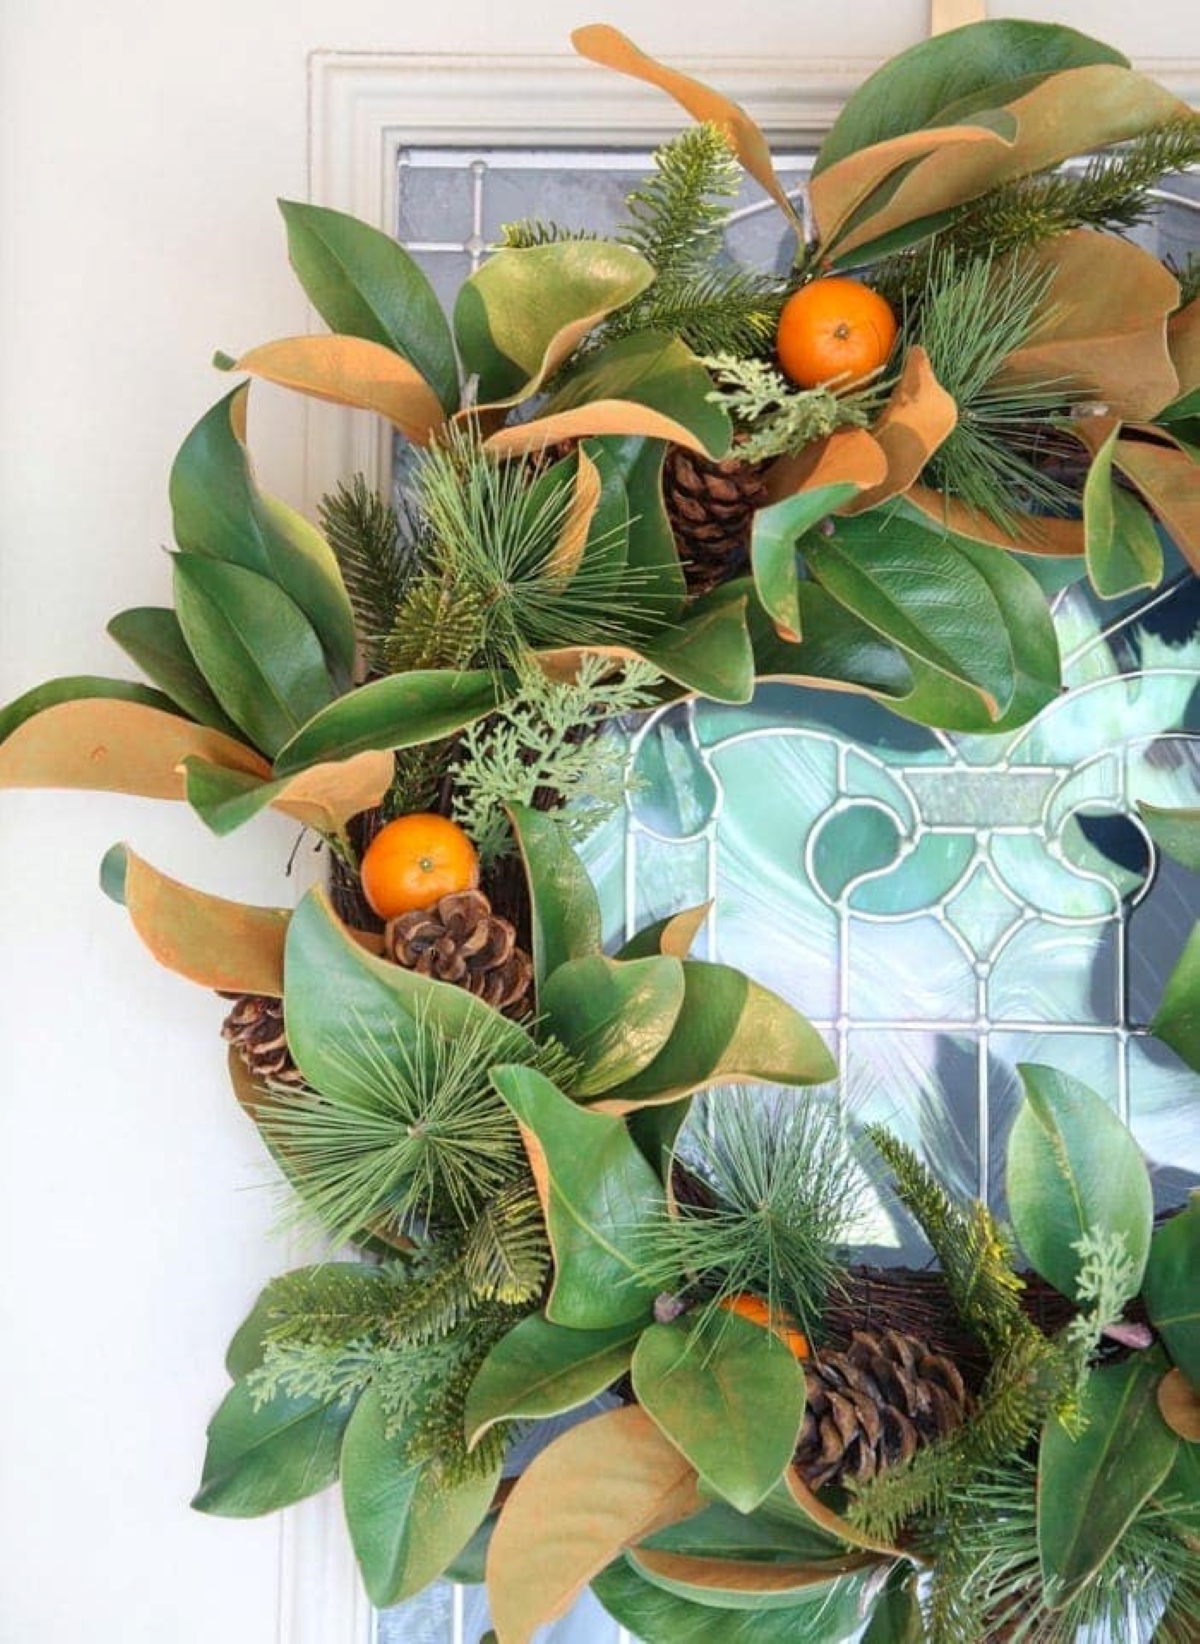 A faux Christmas wreath with clementine oranges